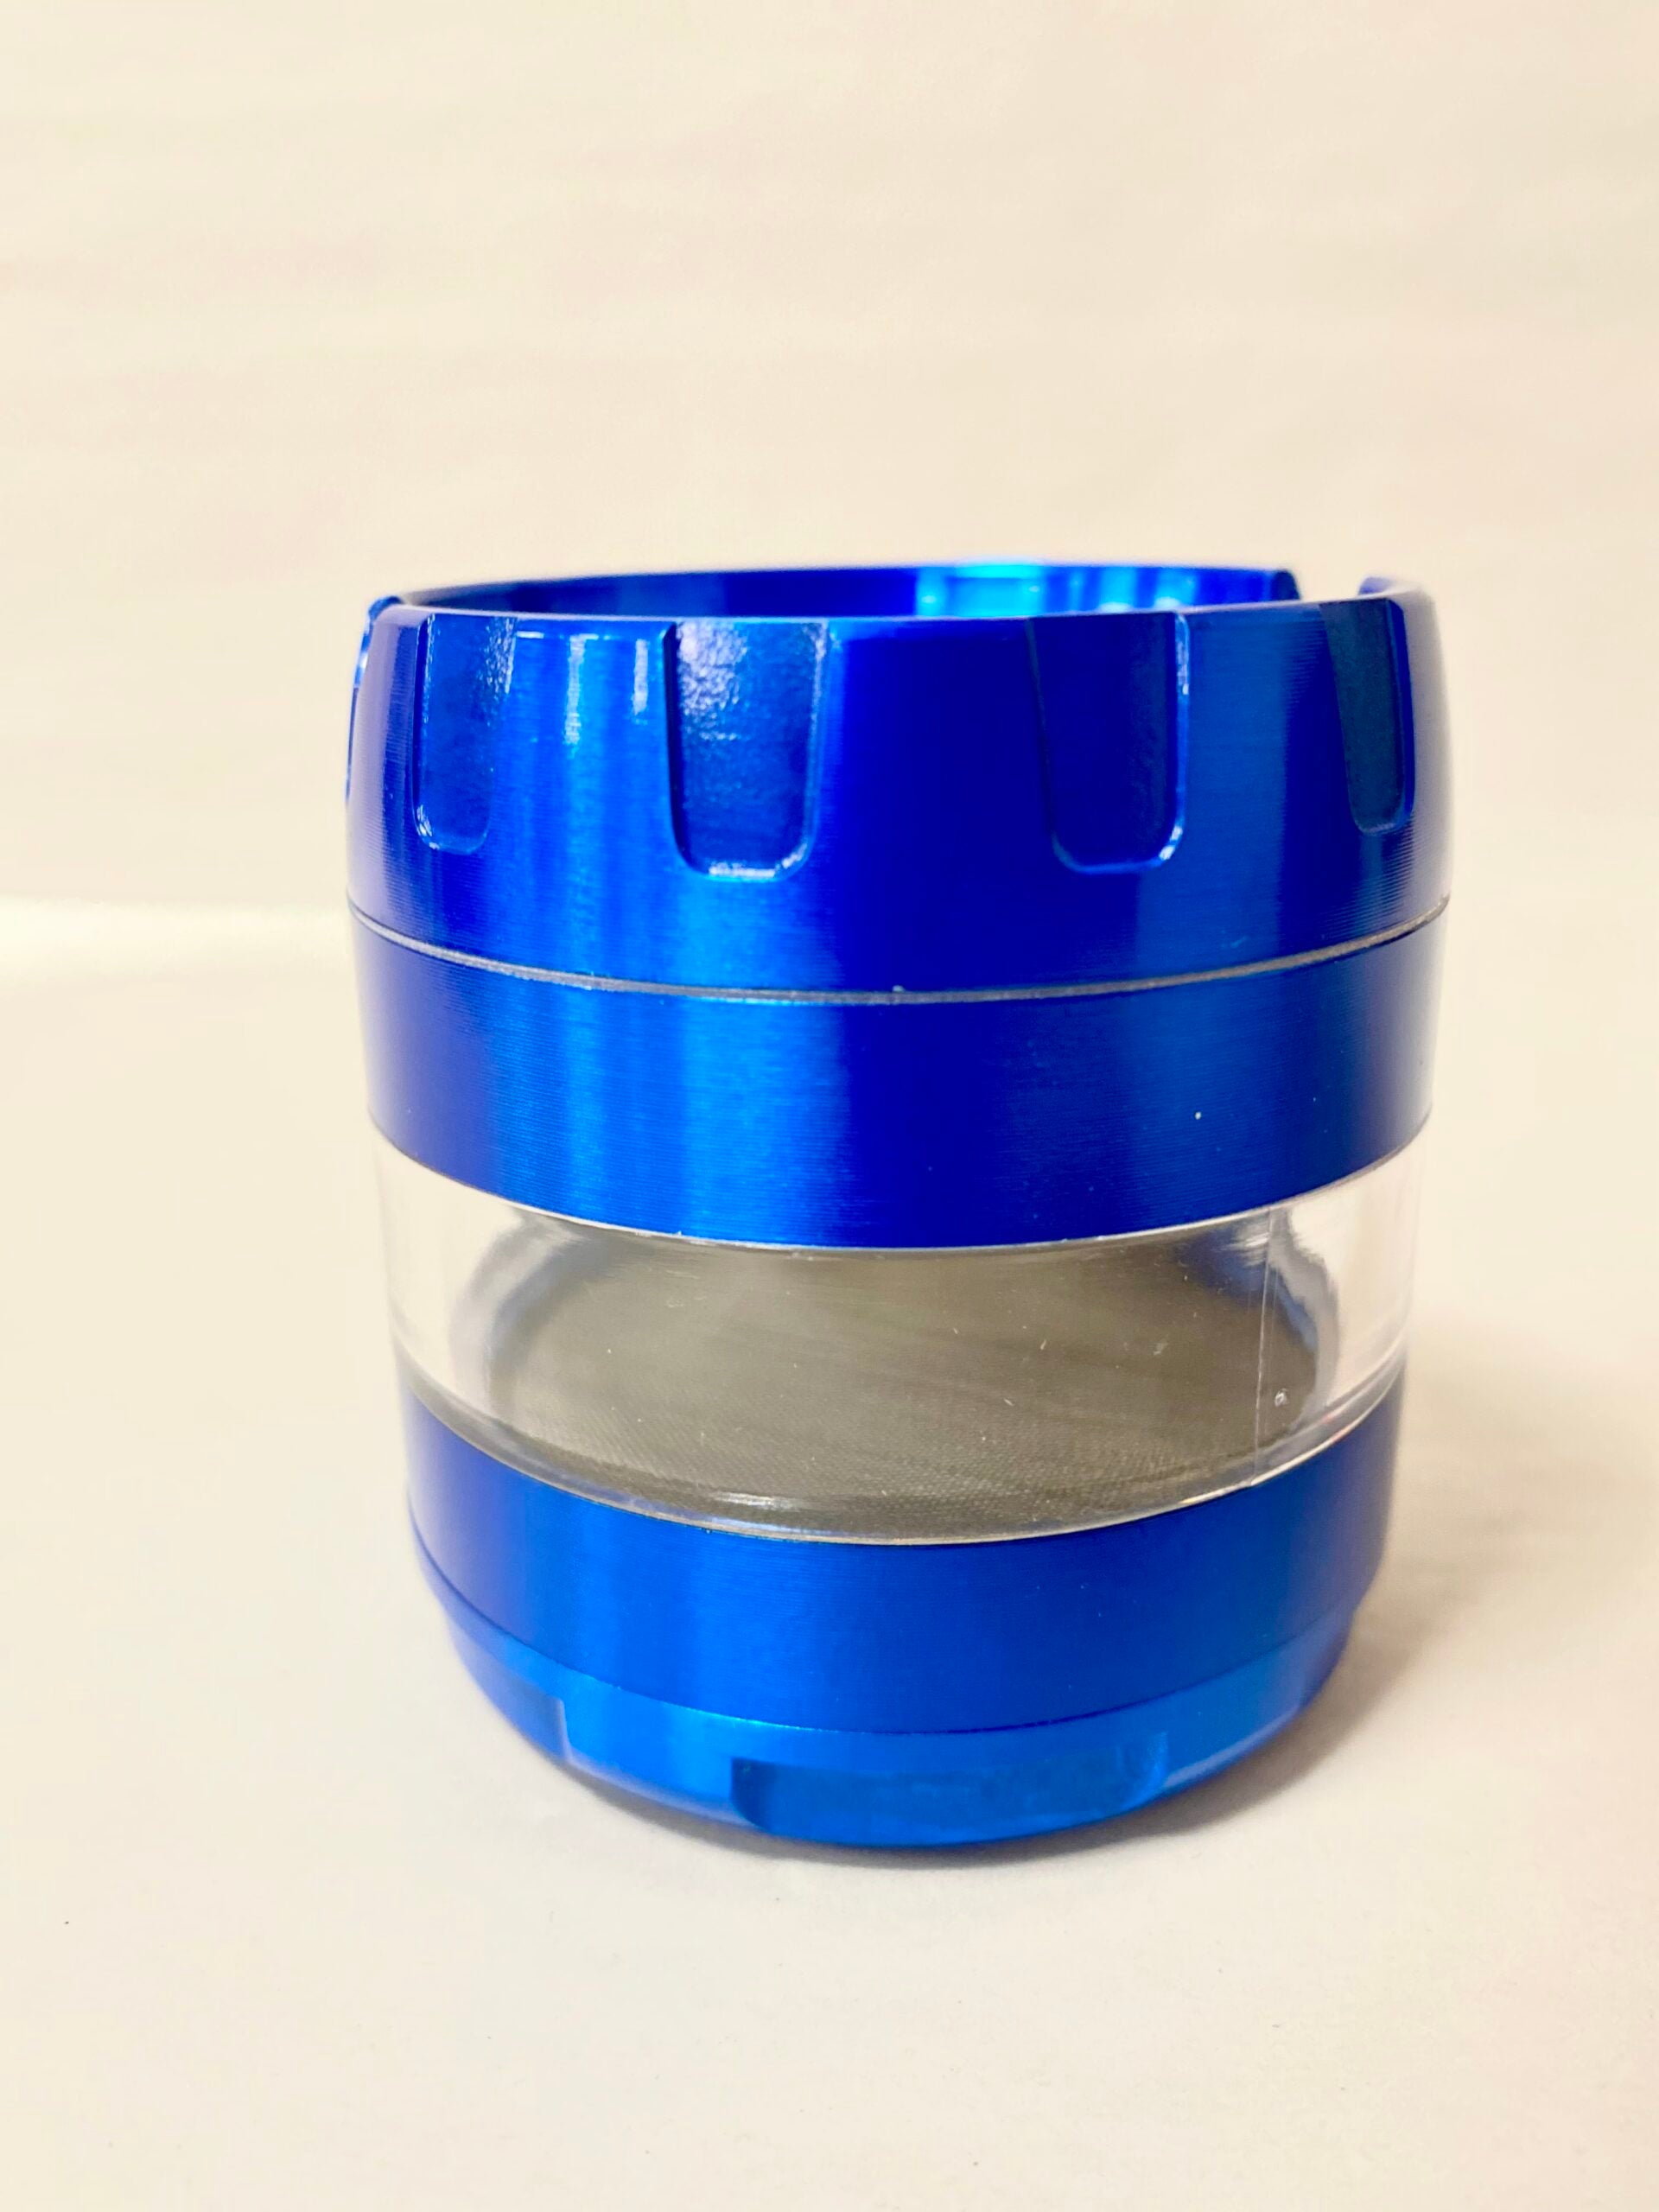 Genie Grinder - Blue with Clear Sides - 4 Pieces